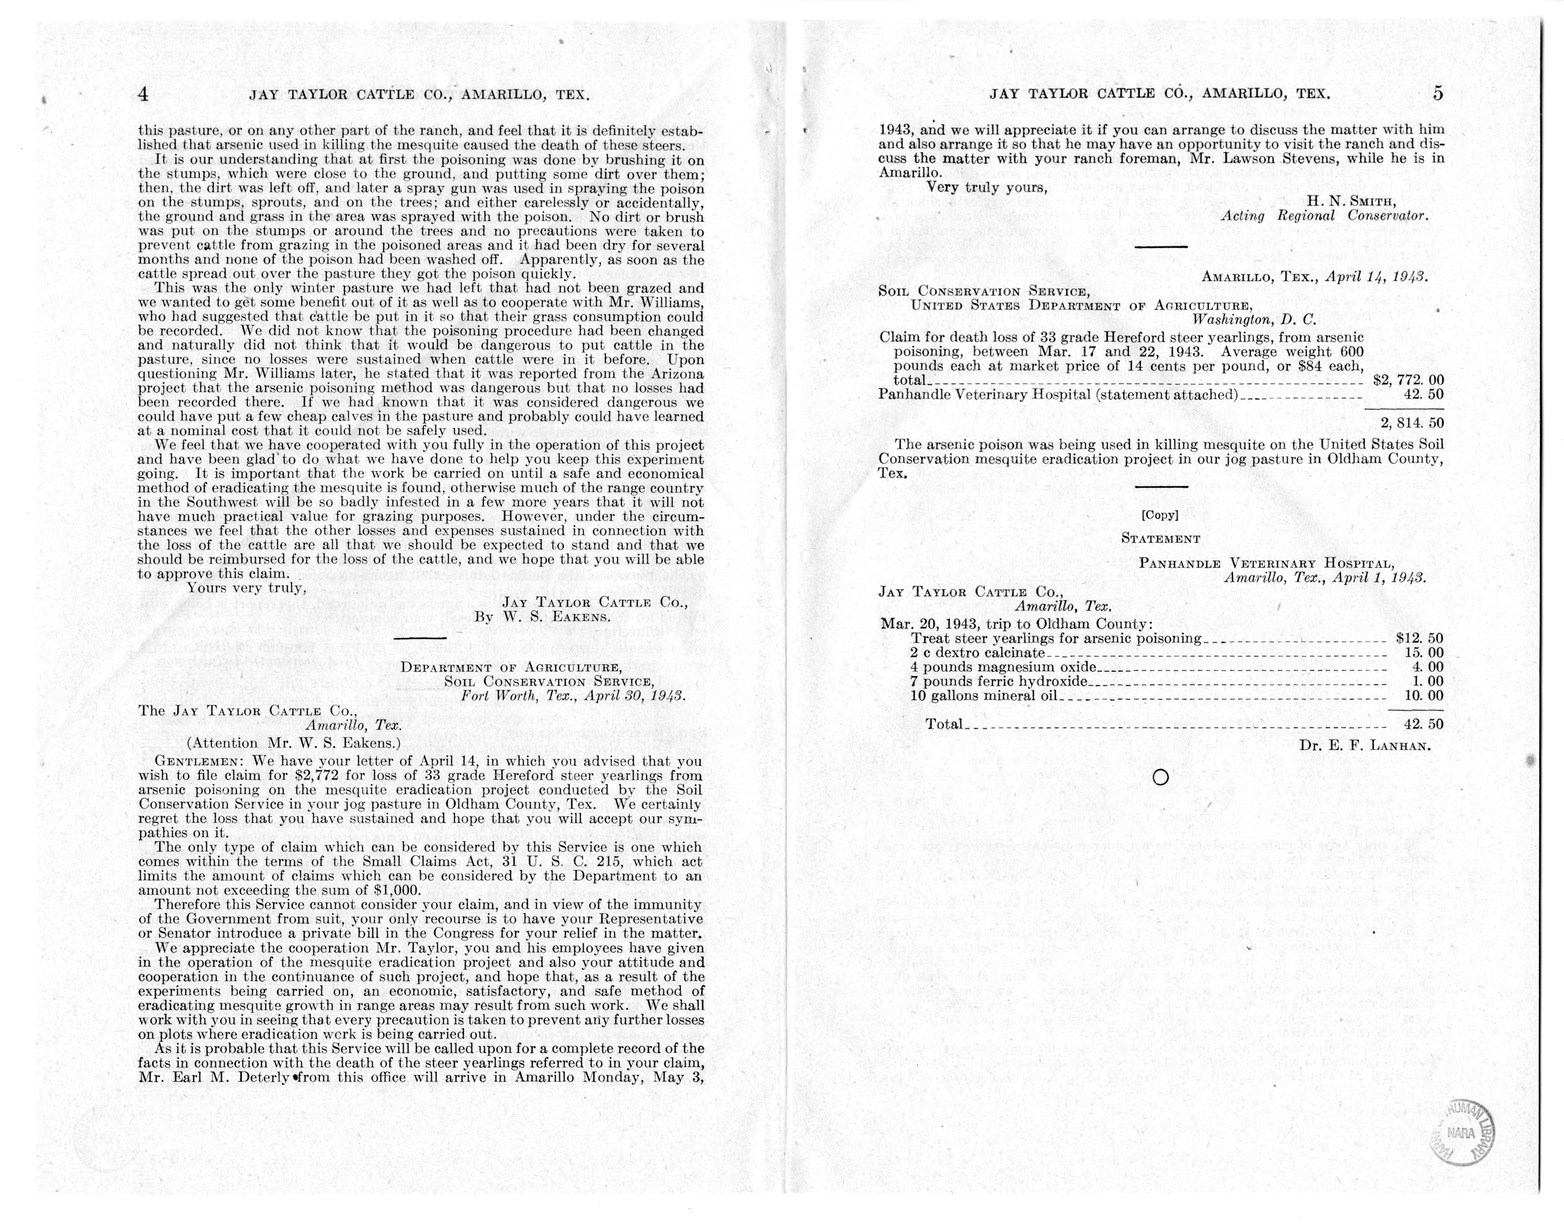 Memorandum from Frederick J. Bailey to M. C. Latta, H.R. 1094, For the Relief of the Jay Taylor Cattle Company, Amarillo, Texas, with Attachments